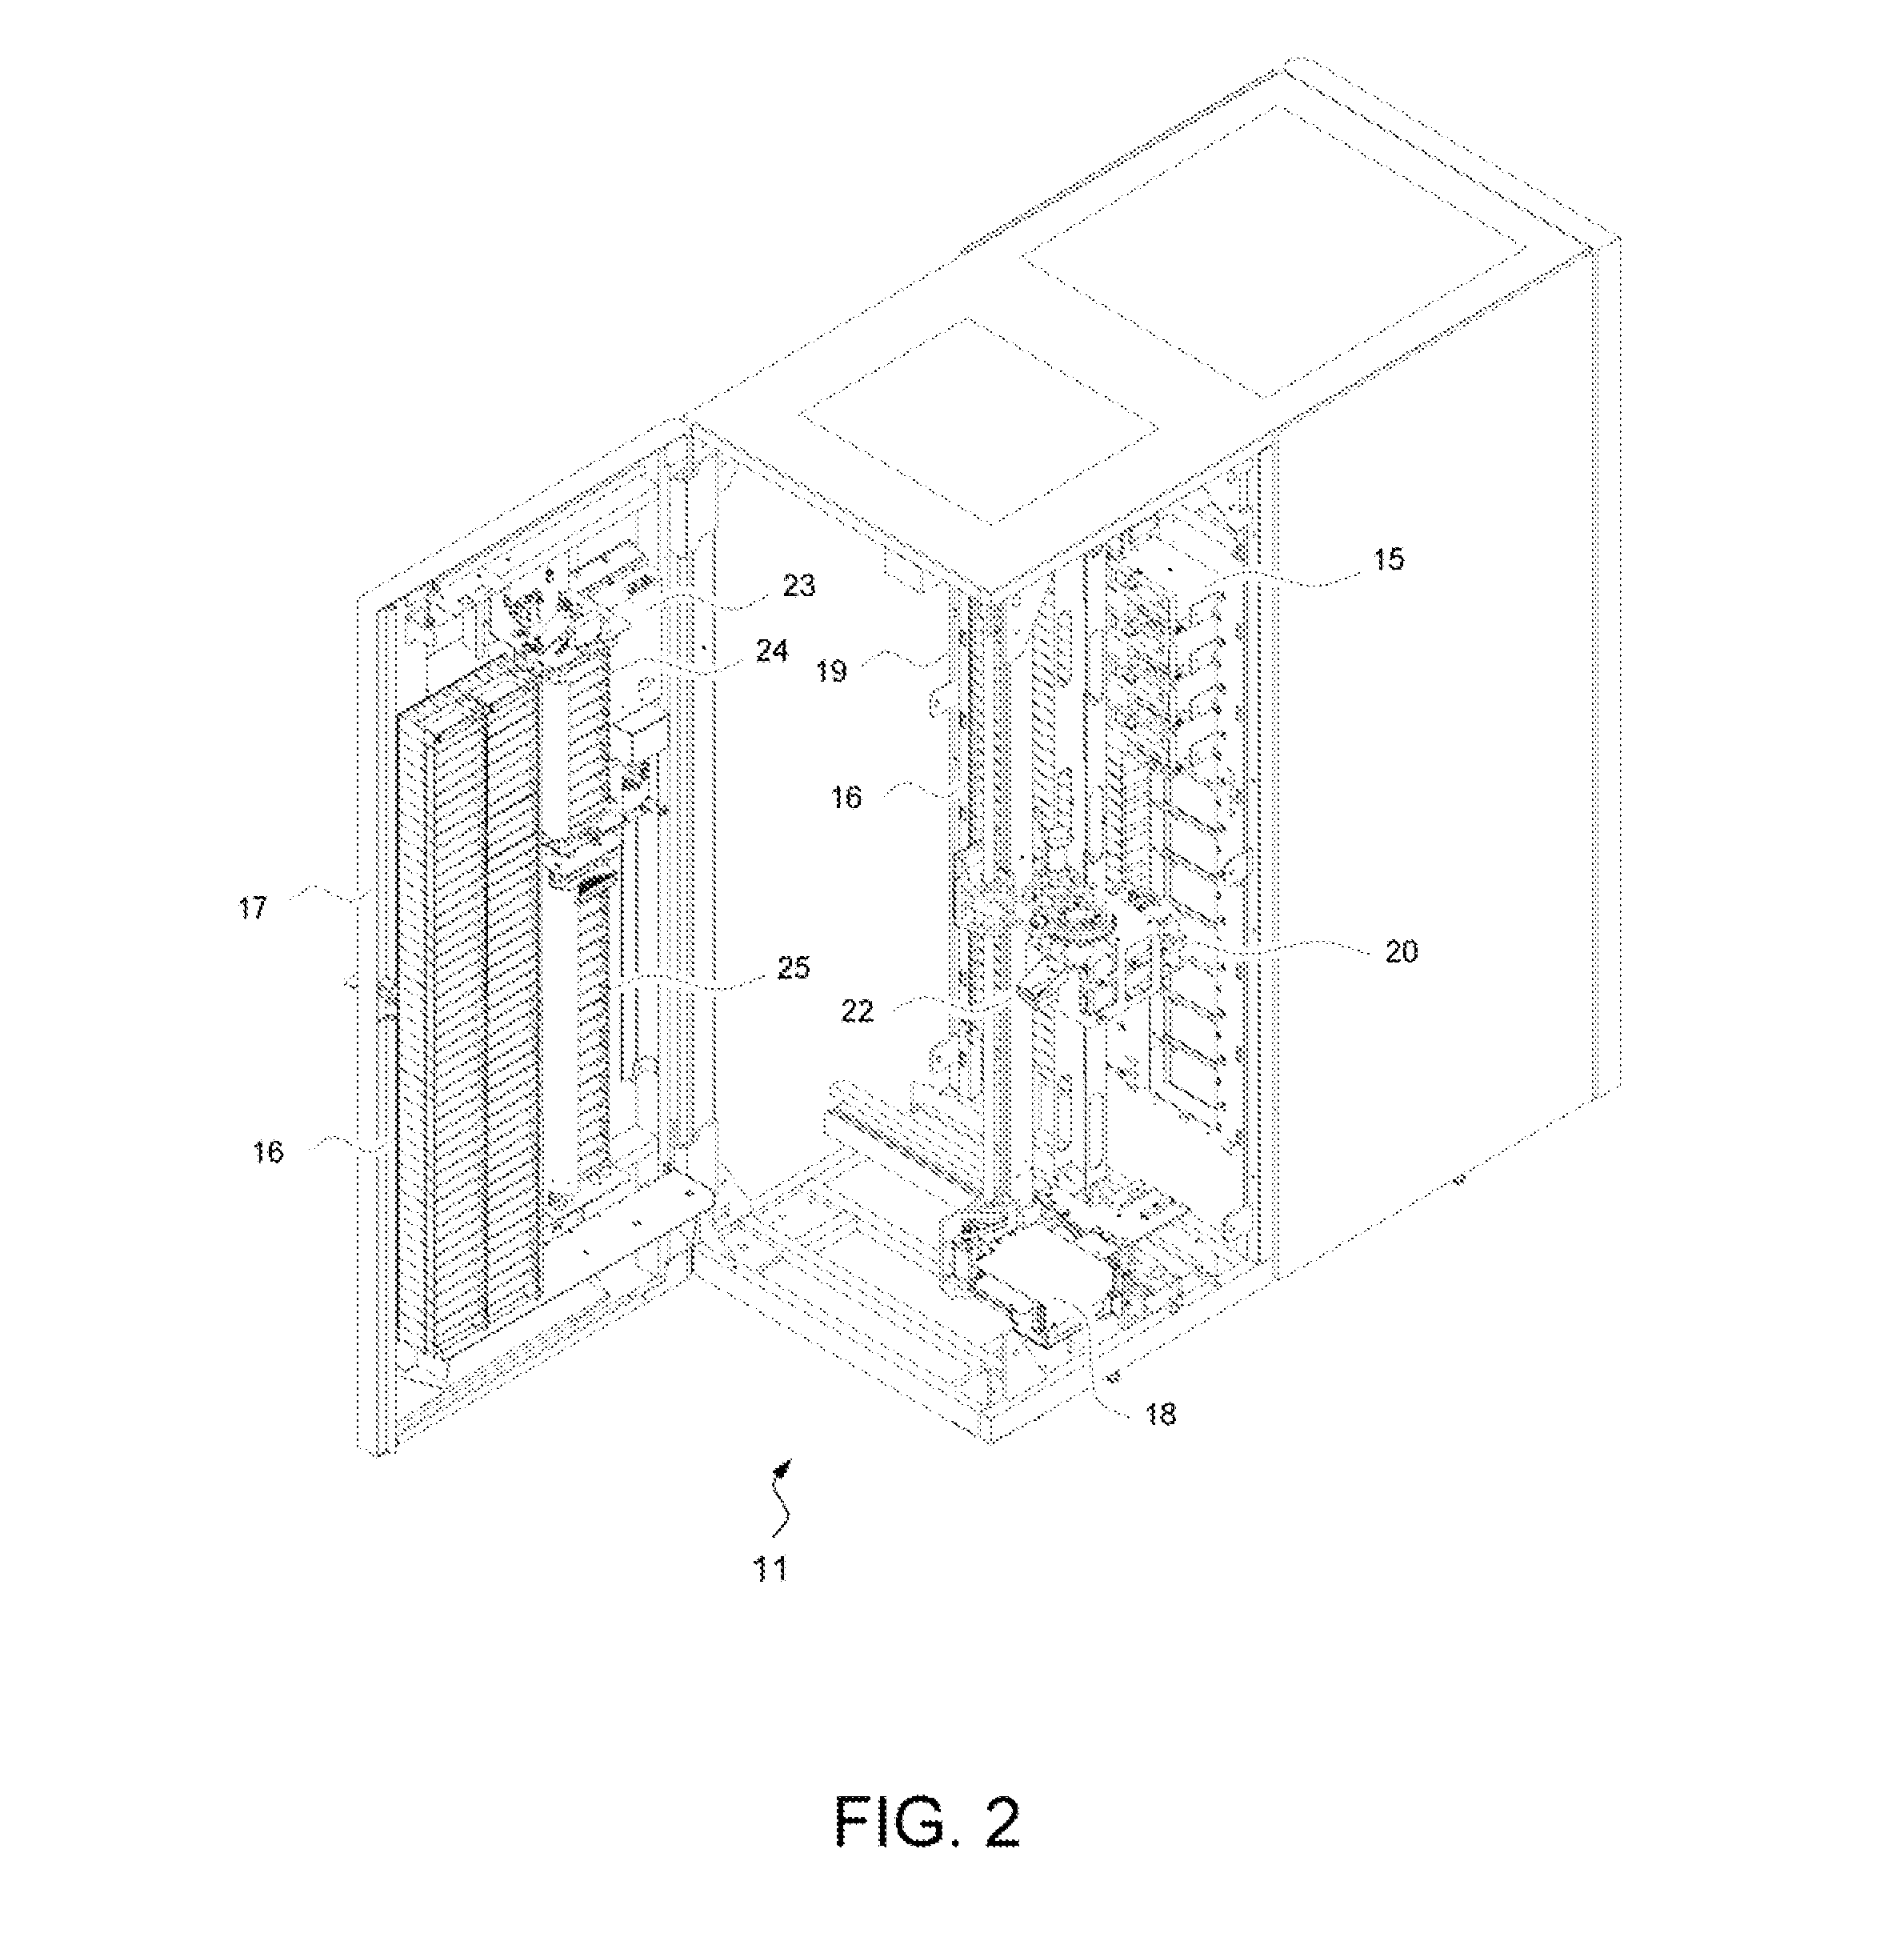 Selective encryption of data stored on removable media in an automated data storage library